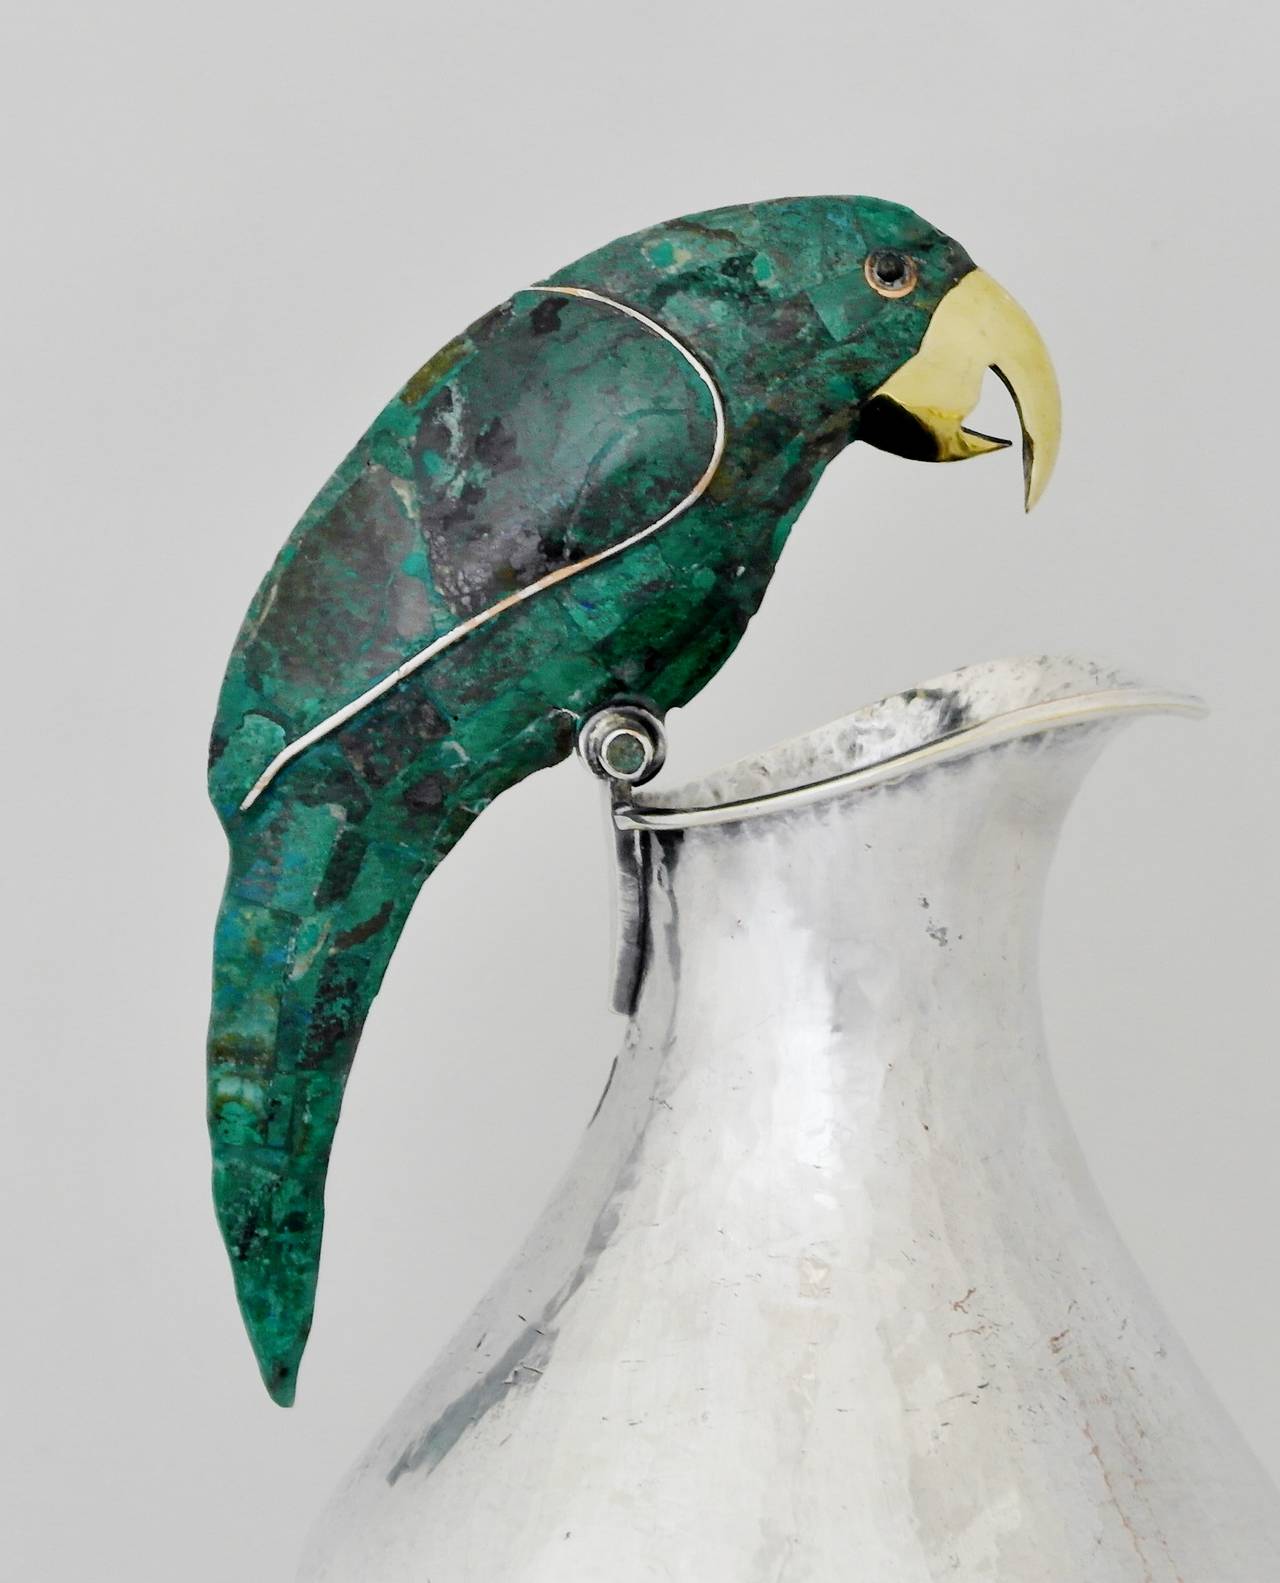 Being offered is a circa 1970 silverplate pitcher by Los Castillo of Taxco, Mexico. Entirely hammered heavy gauge object with parrot handle decorated by azur malachite inlay; brass beak. Dimensions: 8 inches tall x 5 inches diameter. Marked as